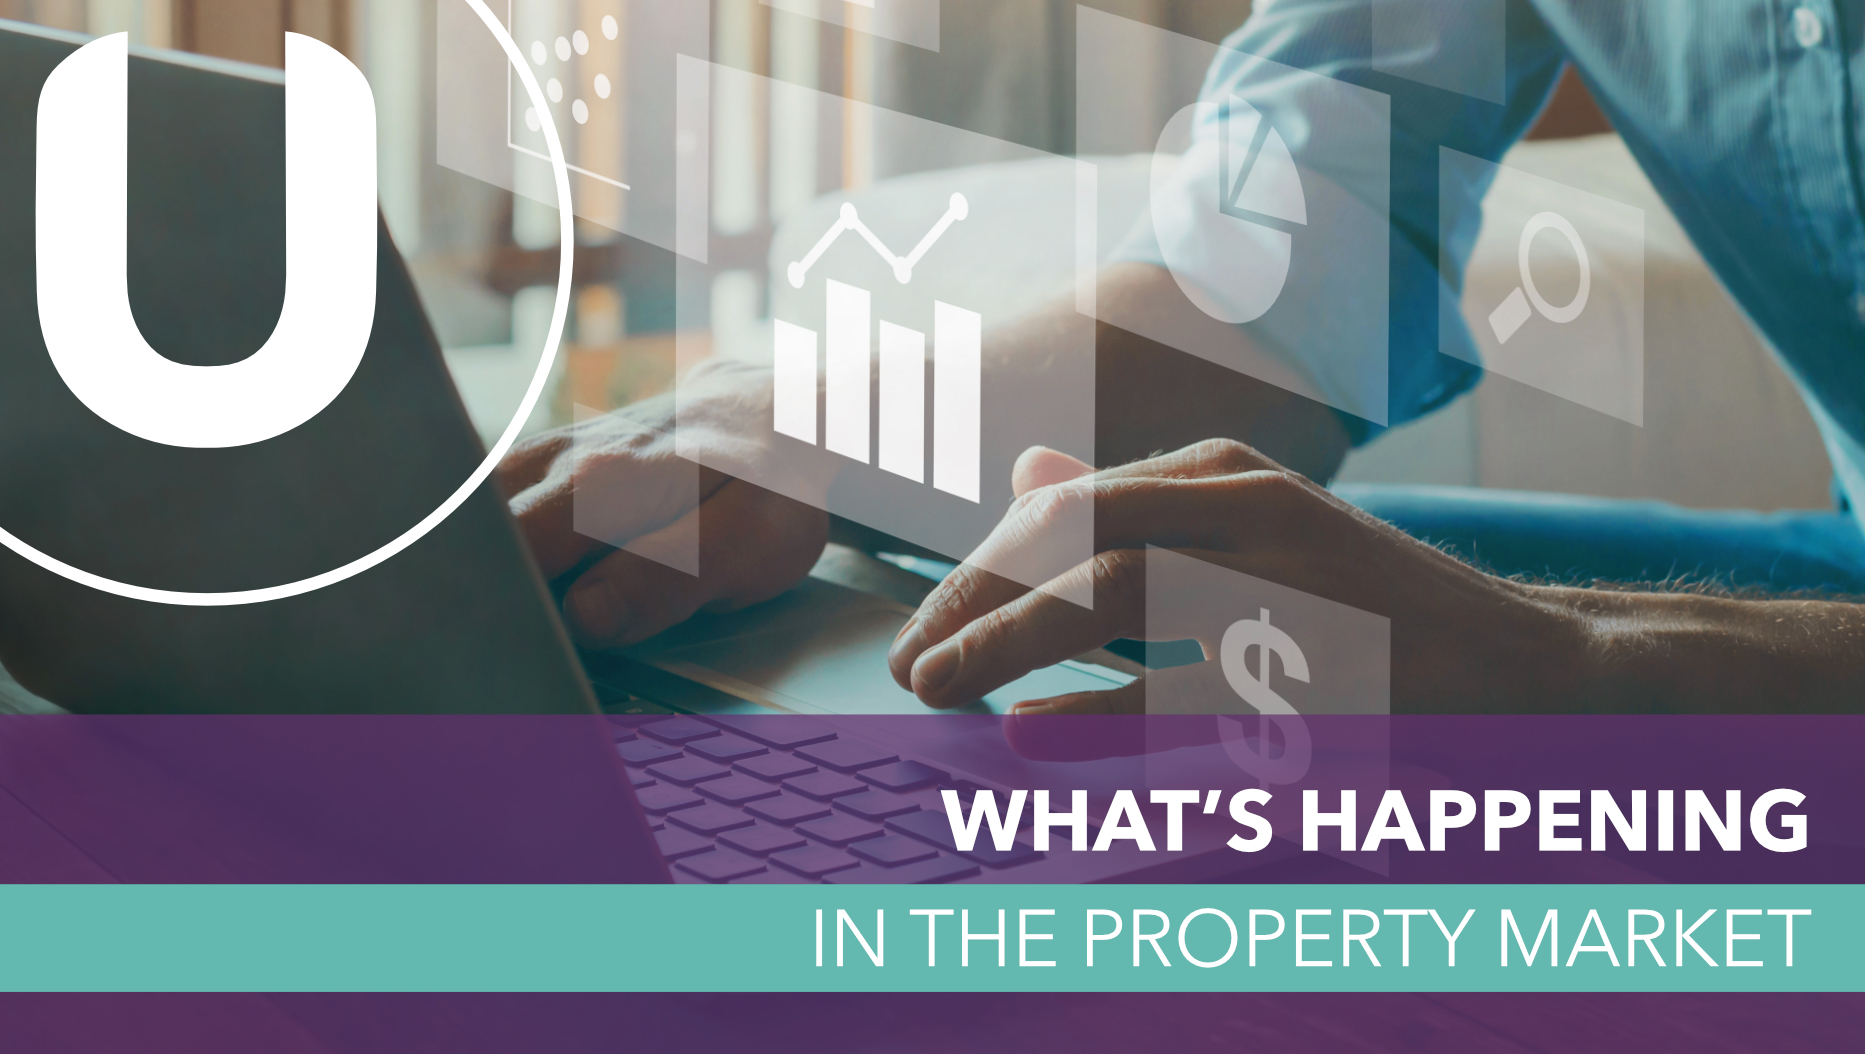 Wondering what’s happening in the property market? Here’s a brief summary of where we think things are headed